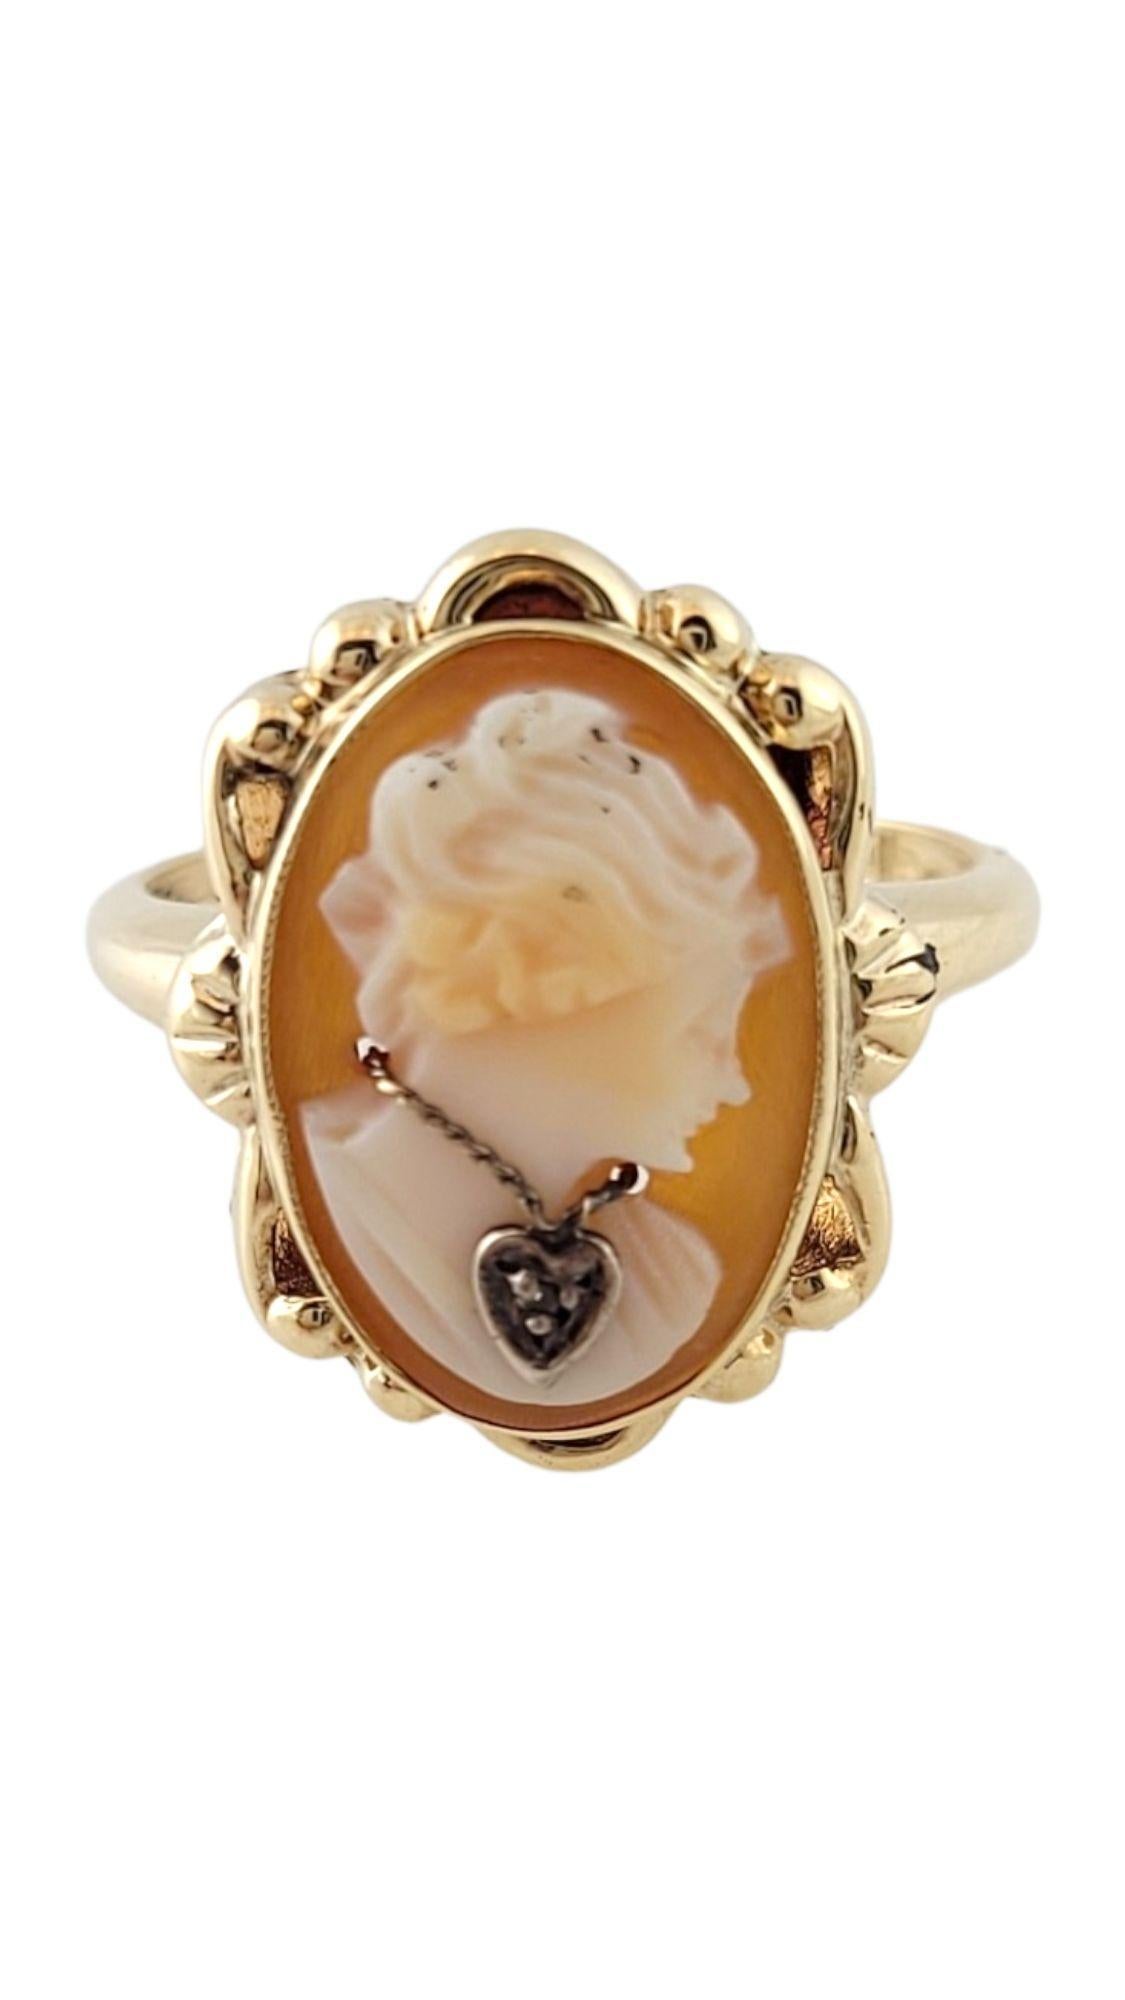 10K Yellow Gold Cameo Ring Size 6

This gorgeous cameo ring is crafted from 14K yellow gold!

Ring size: 6
Shank: 1.6mm
Front: 17.2mm X 13.7mm X 5.8mm

Weight: 2.38 g/ 1.5 dwt

Hallmark: 10K

Very good condition, professionally polished.

Will come